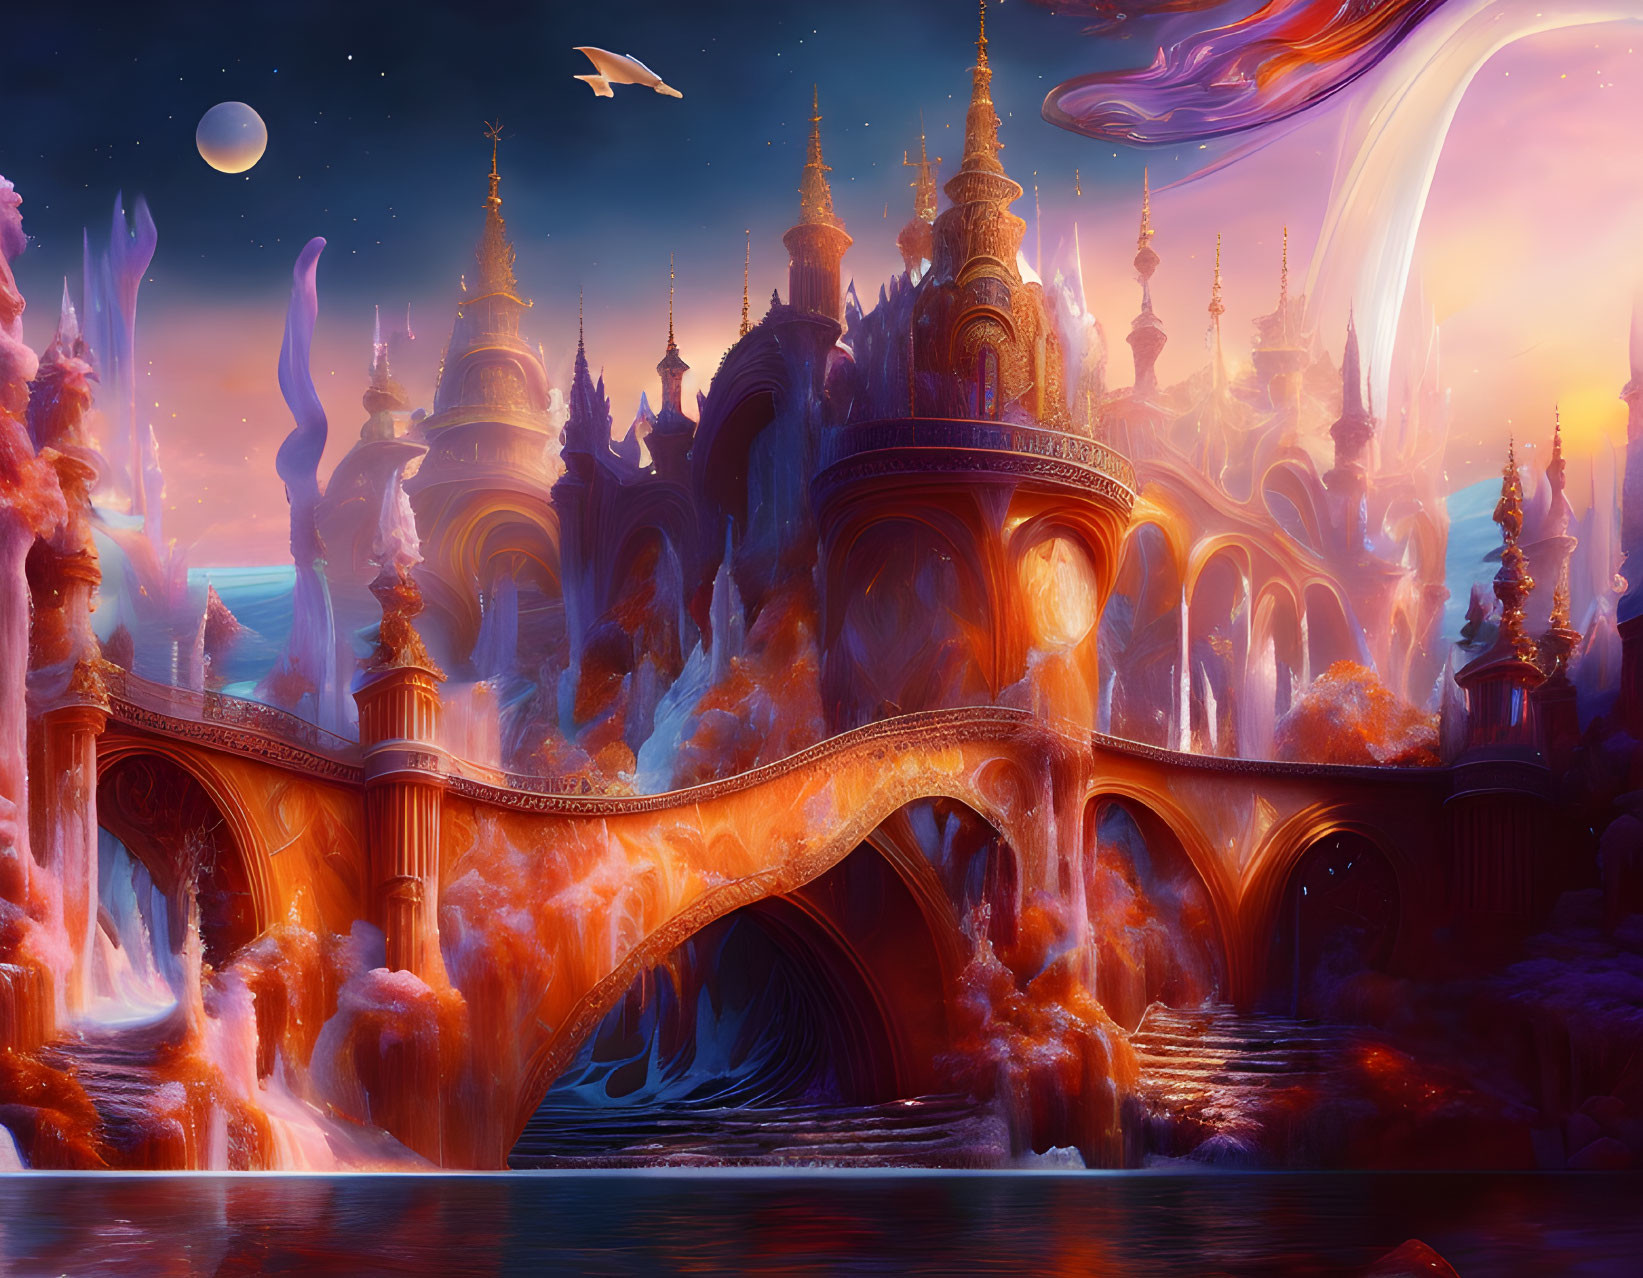 Orange and Blue Castle with Ornate Spires by Waterfall and Planet Sky